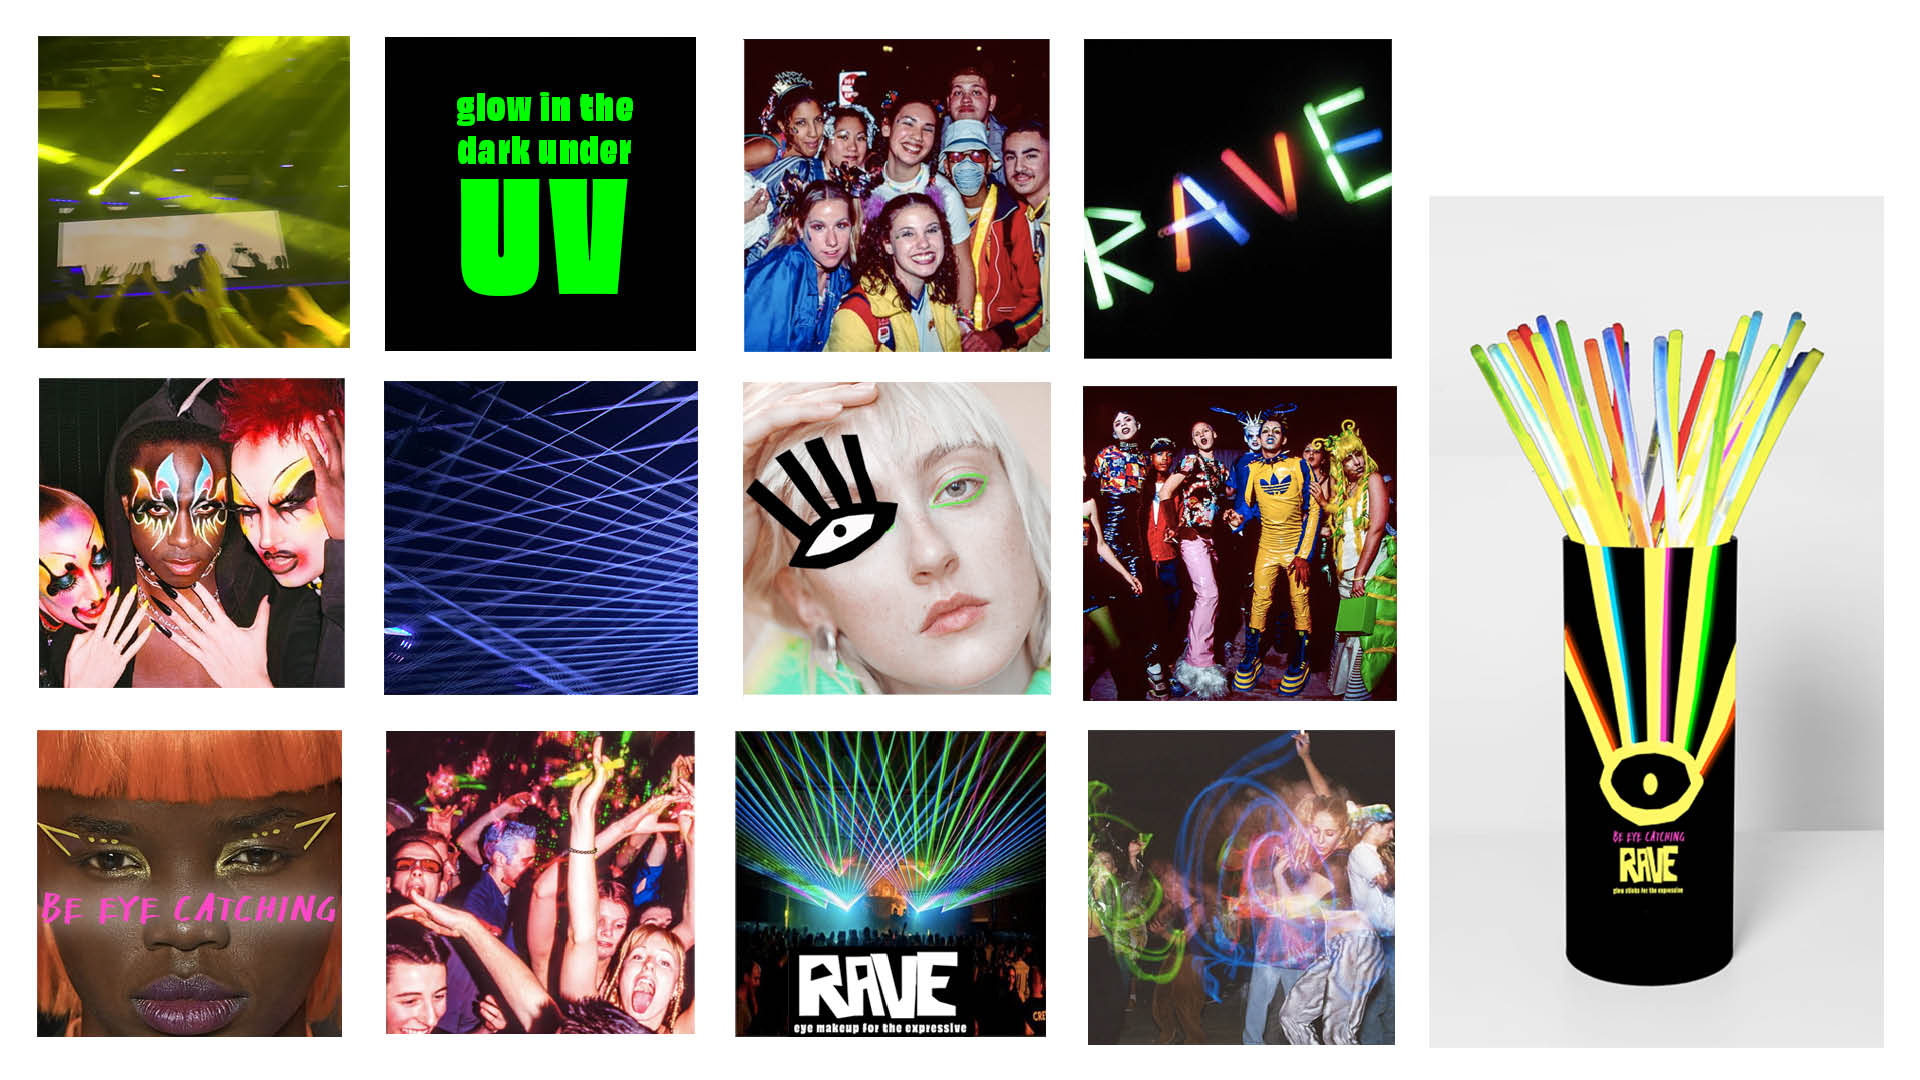 BA Graphic Designers work by Amber Mills-Rist showing RAVE visual identity and the expressive culture